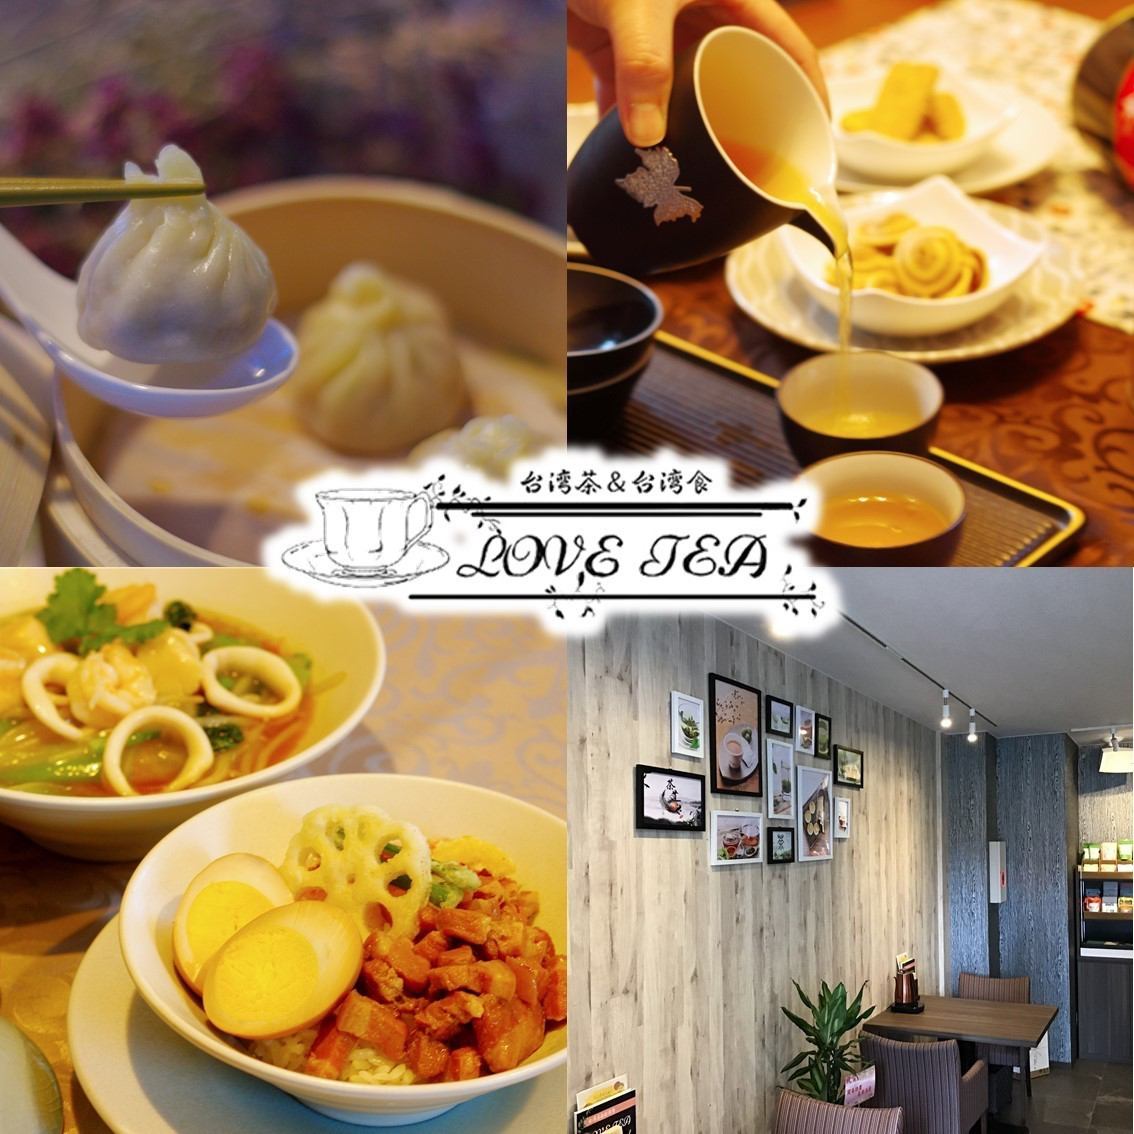 Enjoy authentic Taiwanese food in Sapporo without going to Taiwan ♪